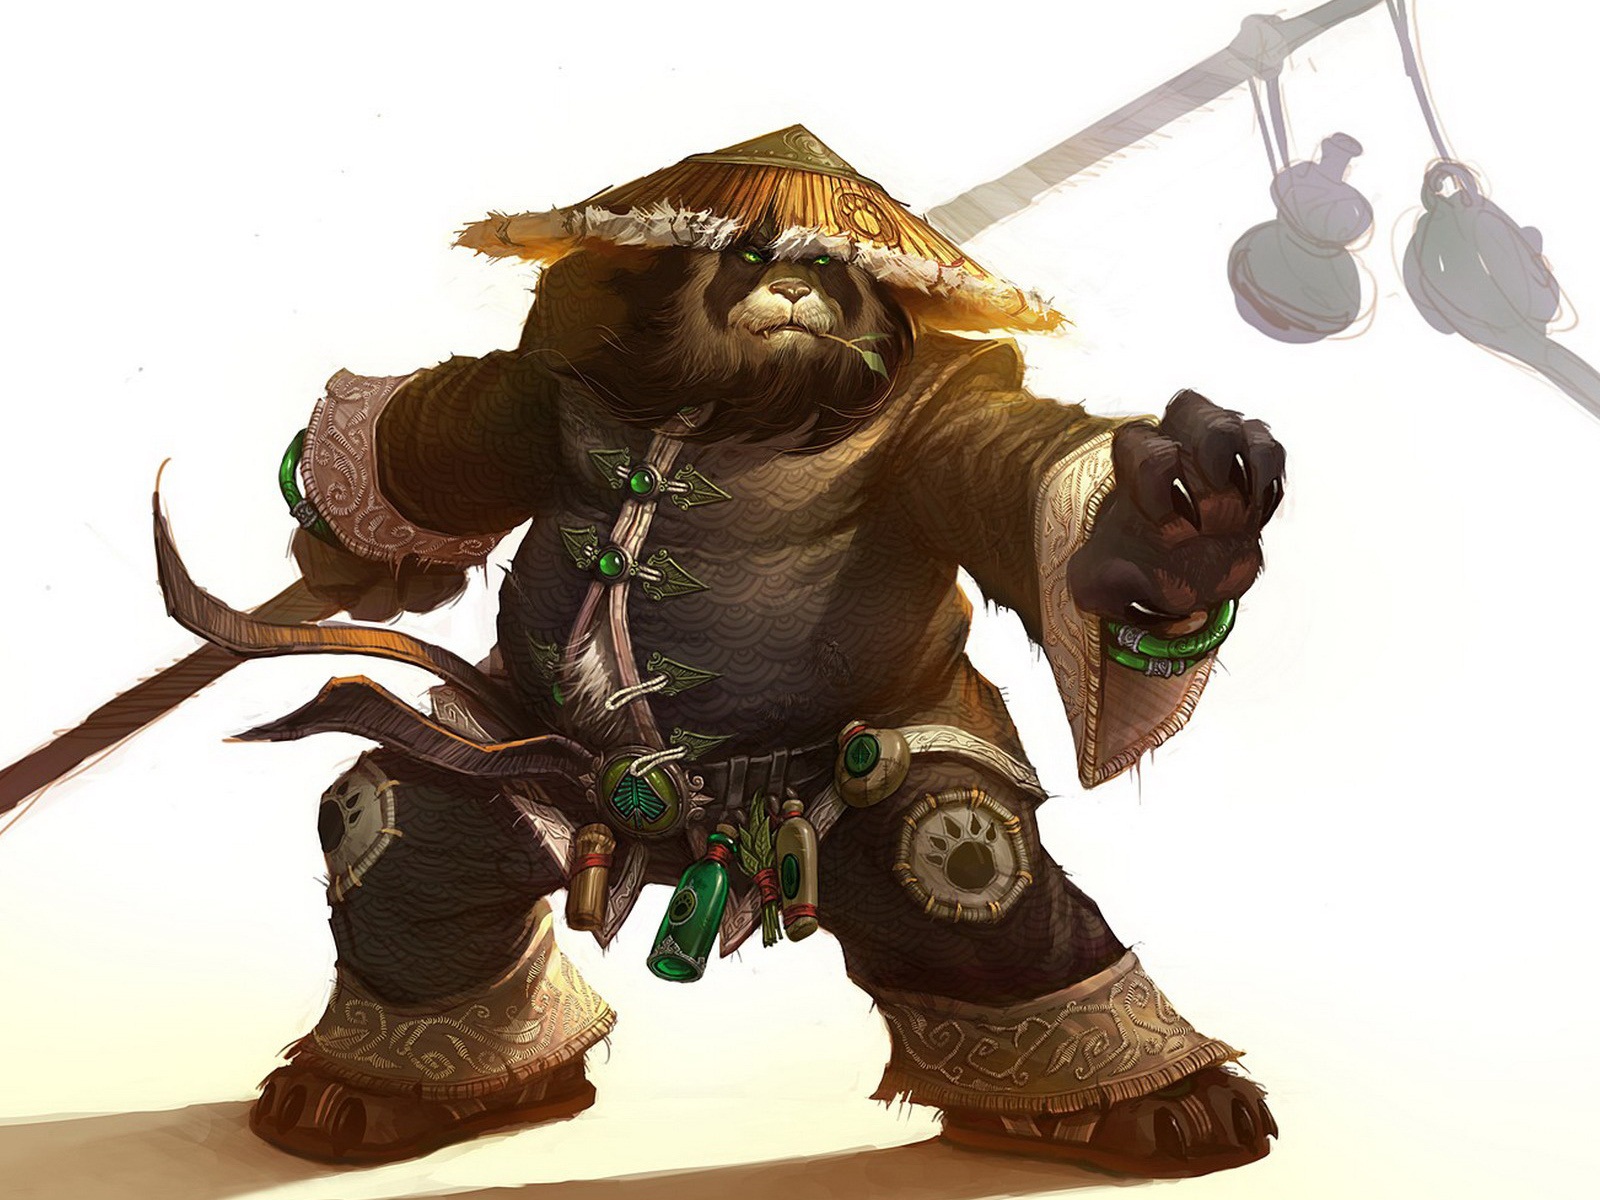 World of Warcraft: Mists of Pandaria HD wallpapers #9 - 1600x1200